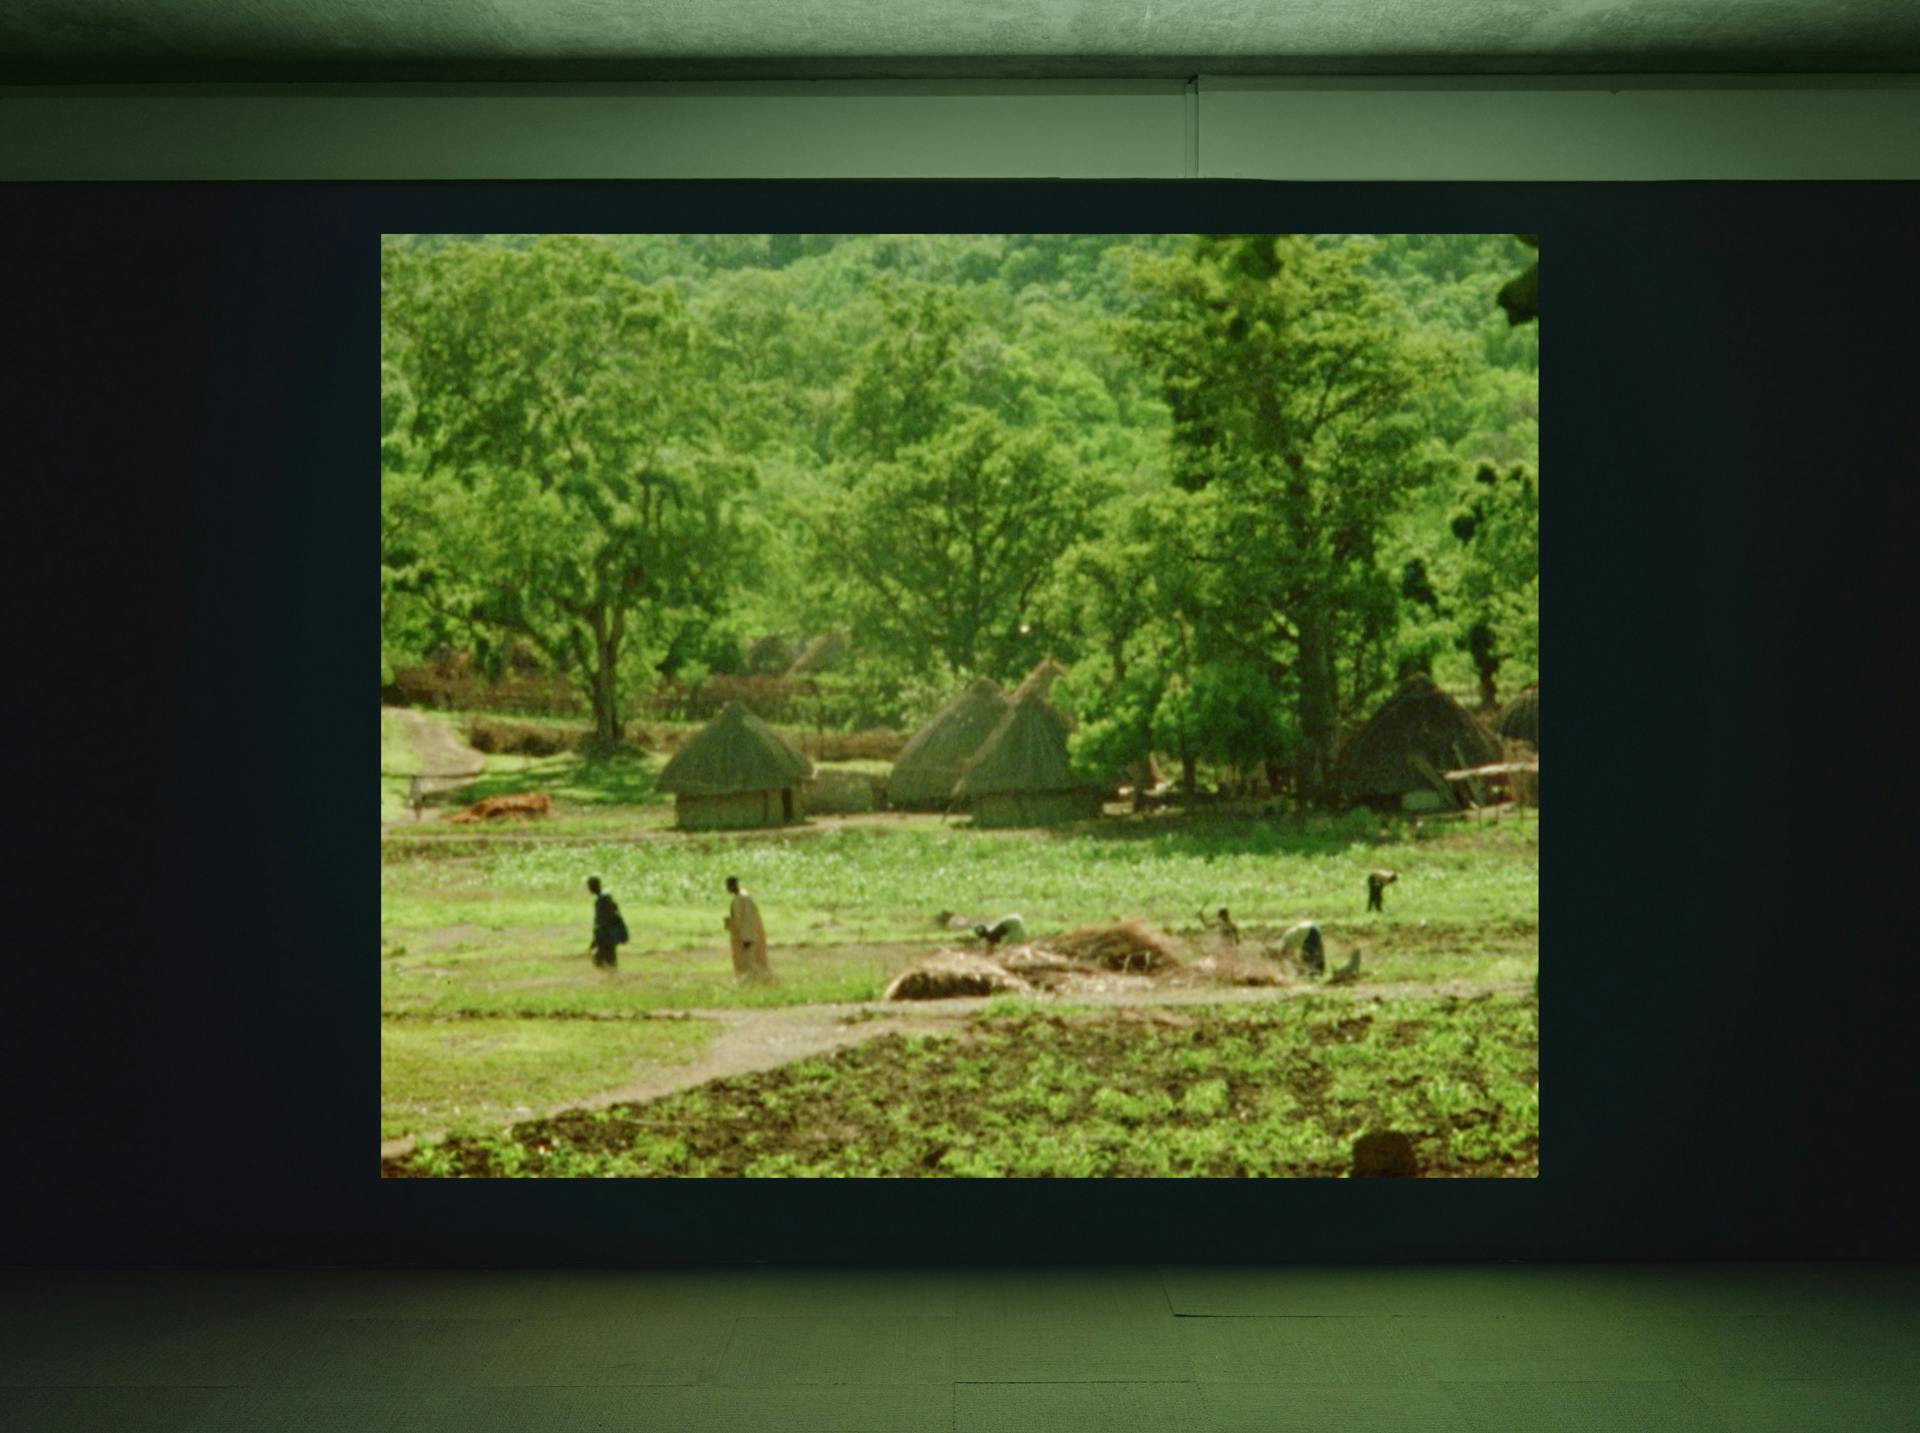 A video on a wall in a dark room depicting a lush green landscape.